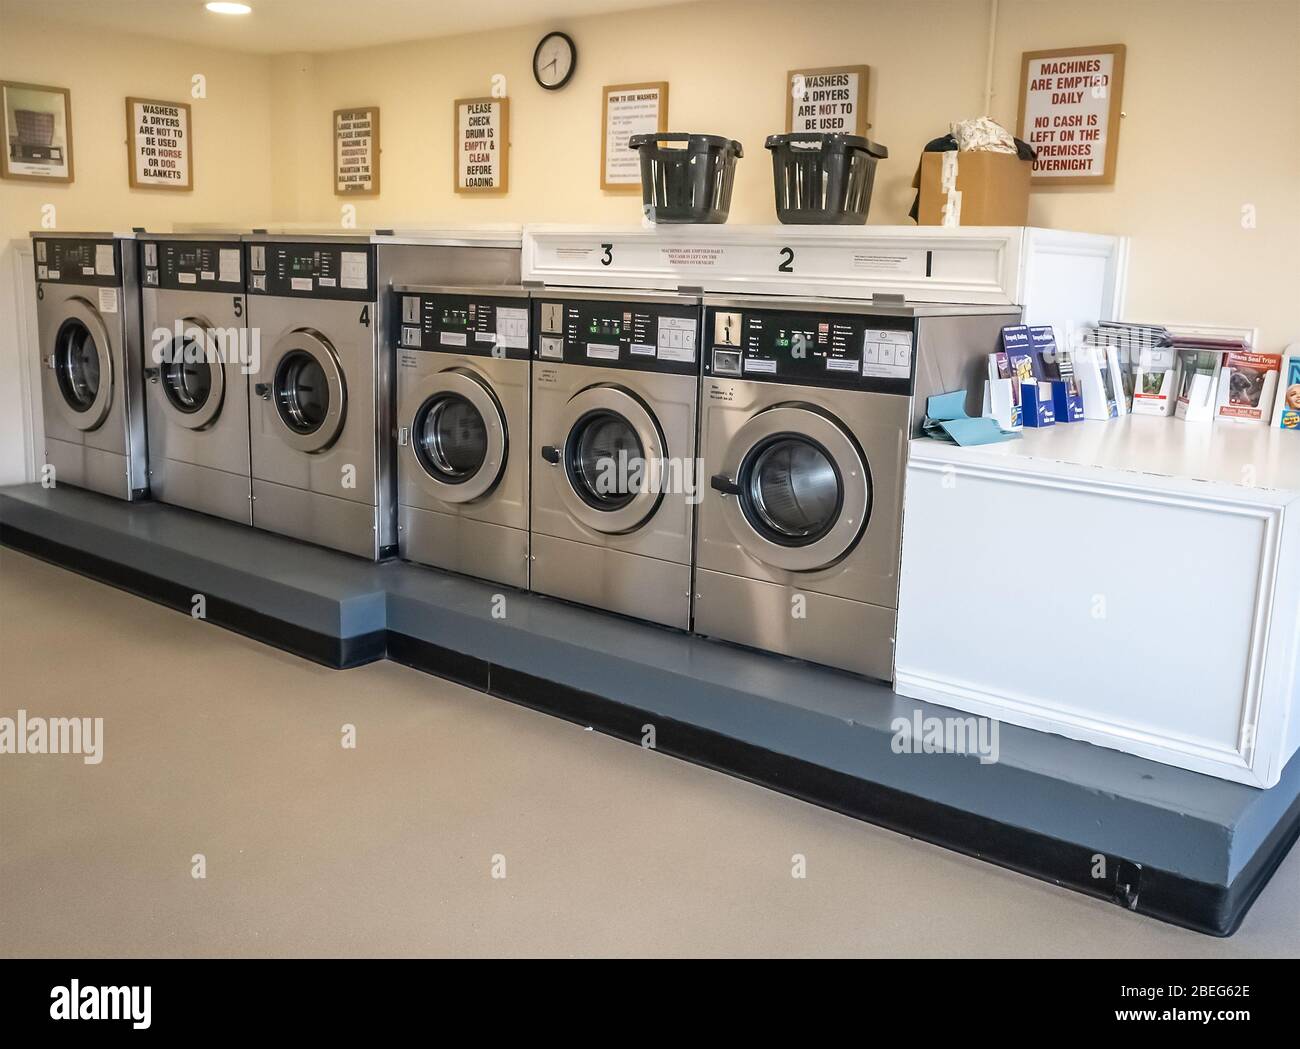 Washing machines and laundry equipment inside an empty laundrette, an essential and key building, during the 2020 Coronavirus lockdown Stock Photo